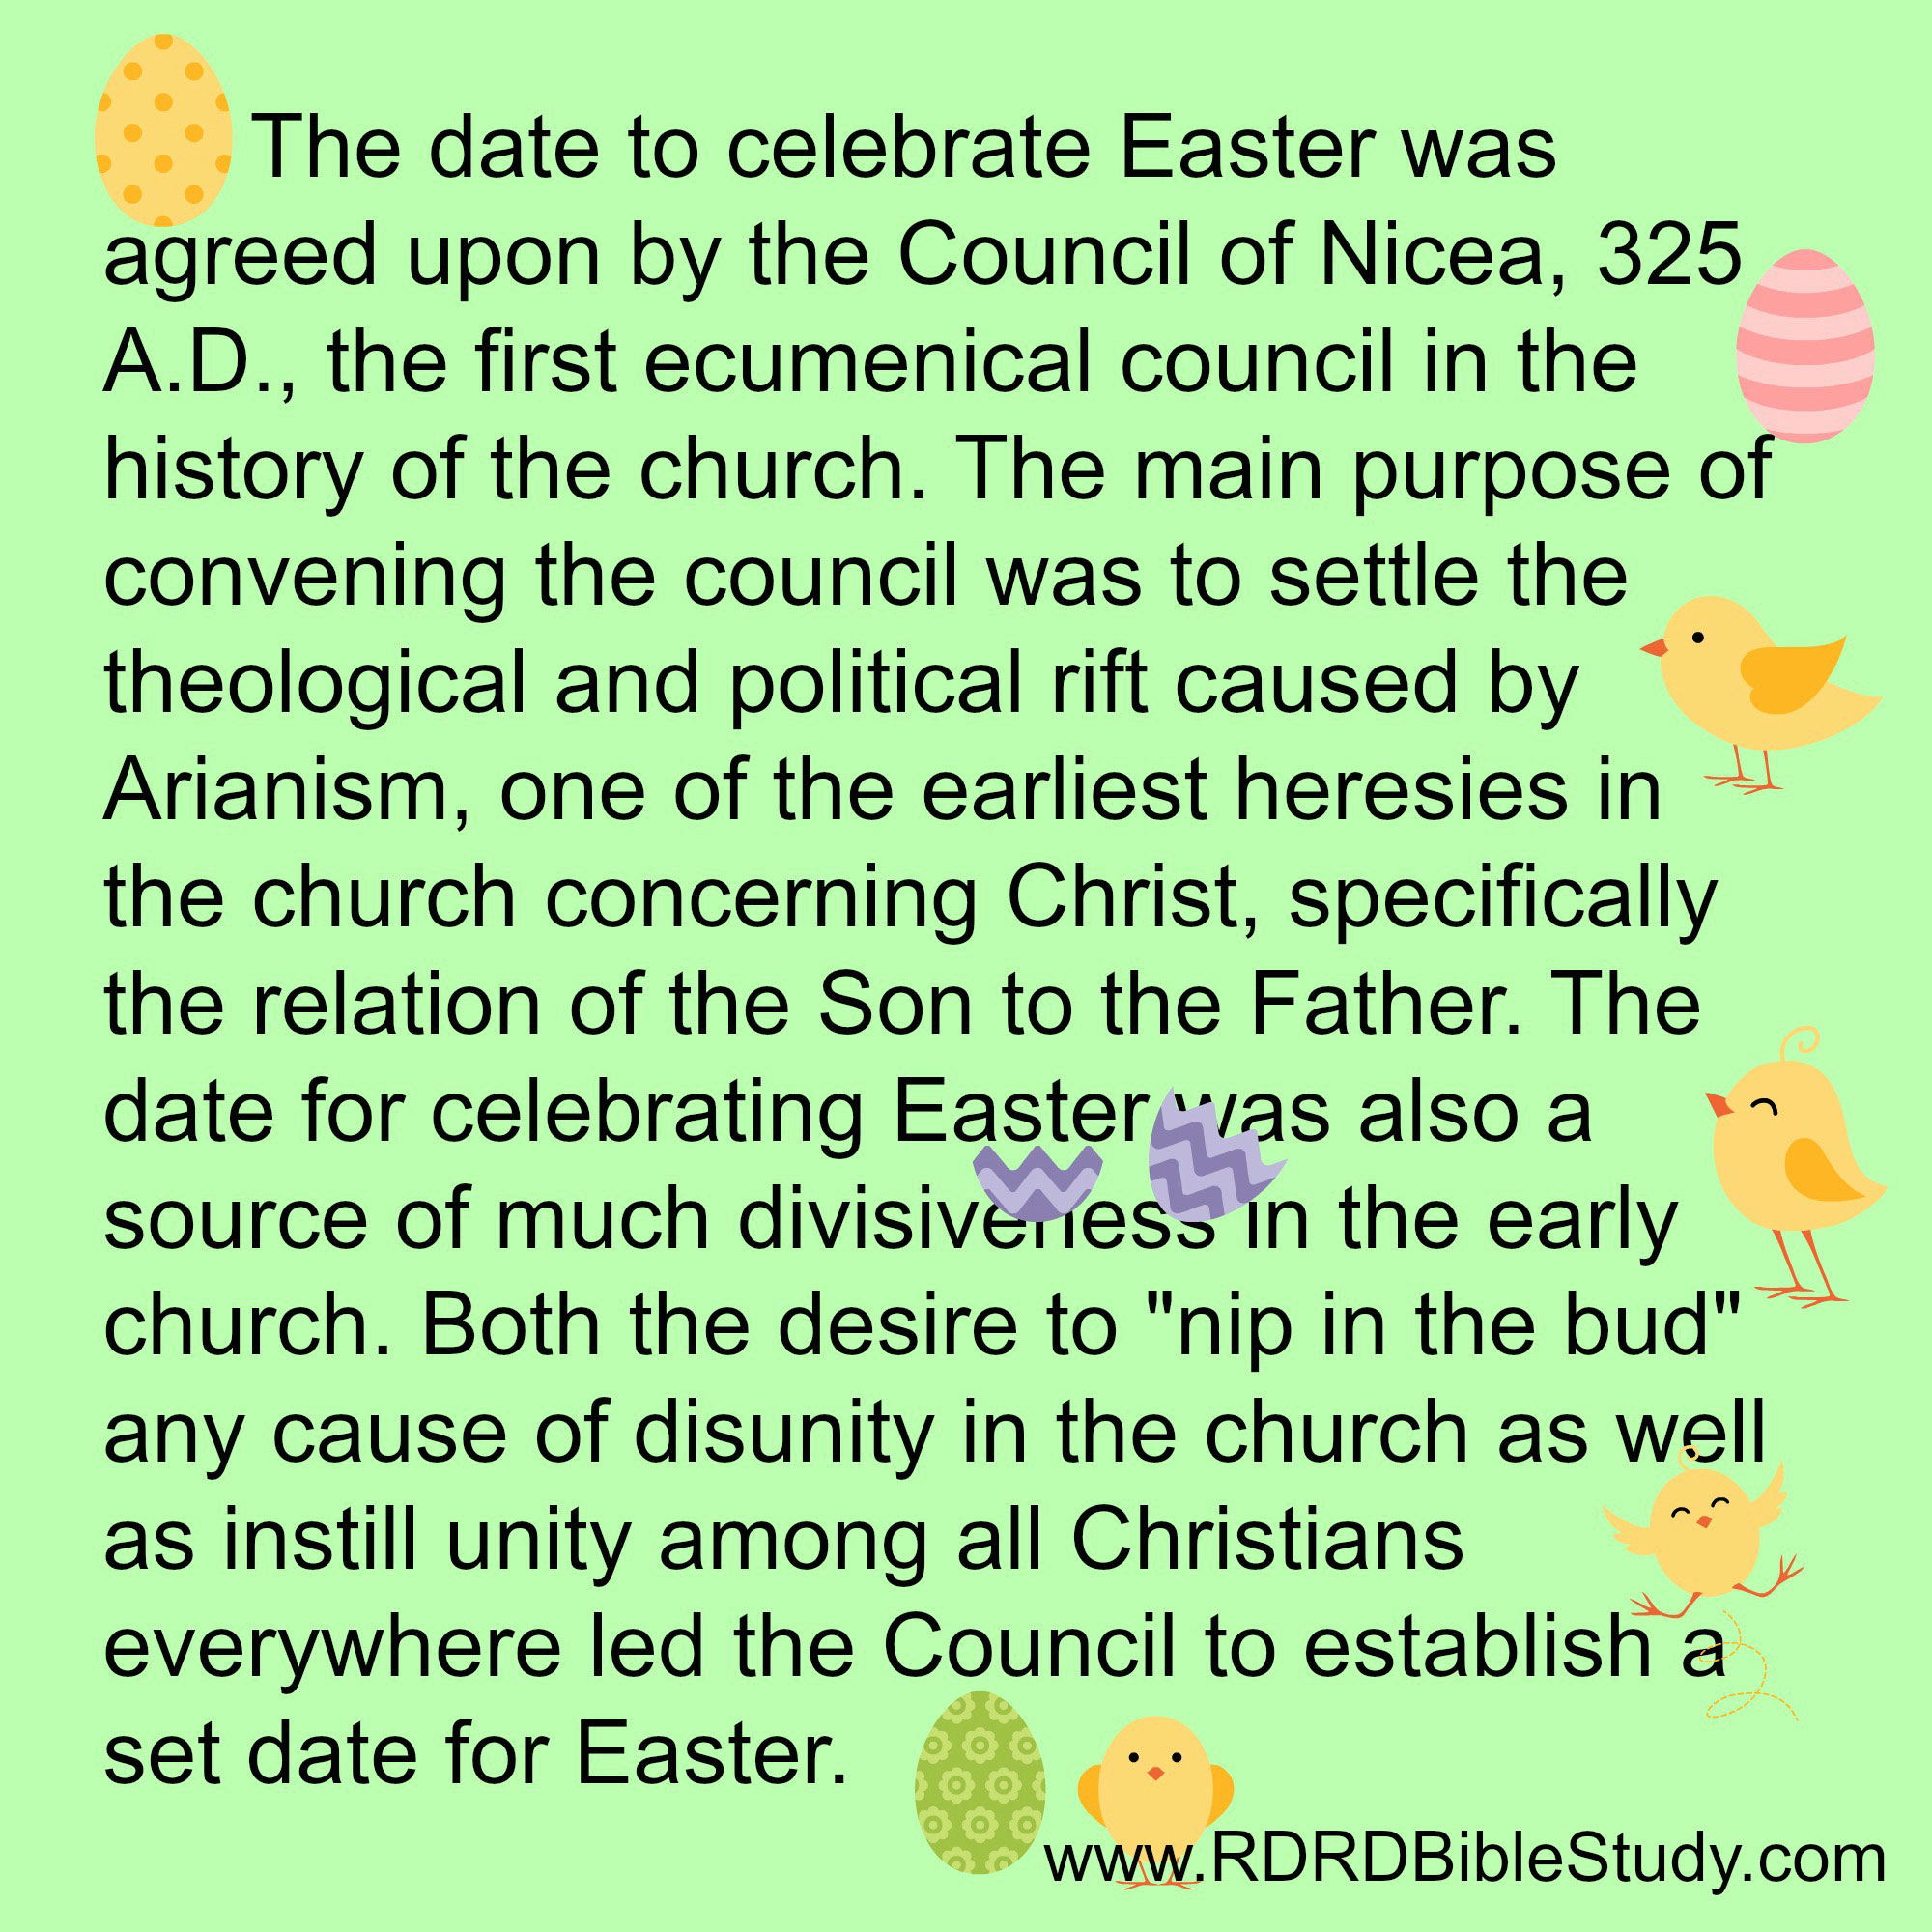 RDRD Bible Study When Easter Council of Nicaea